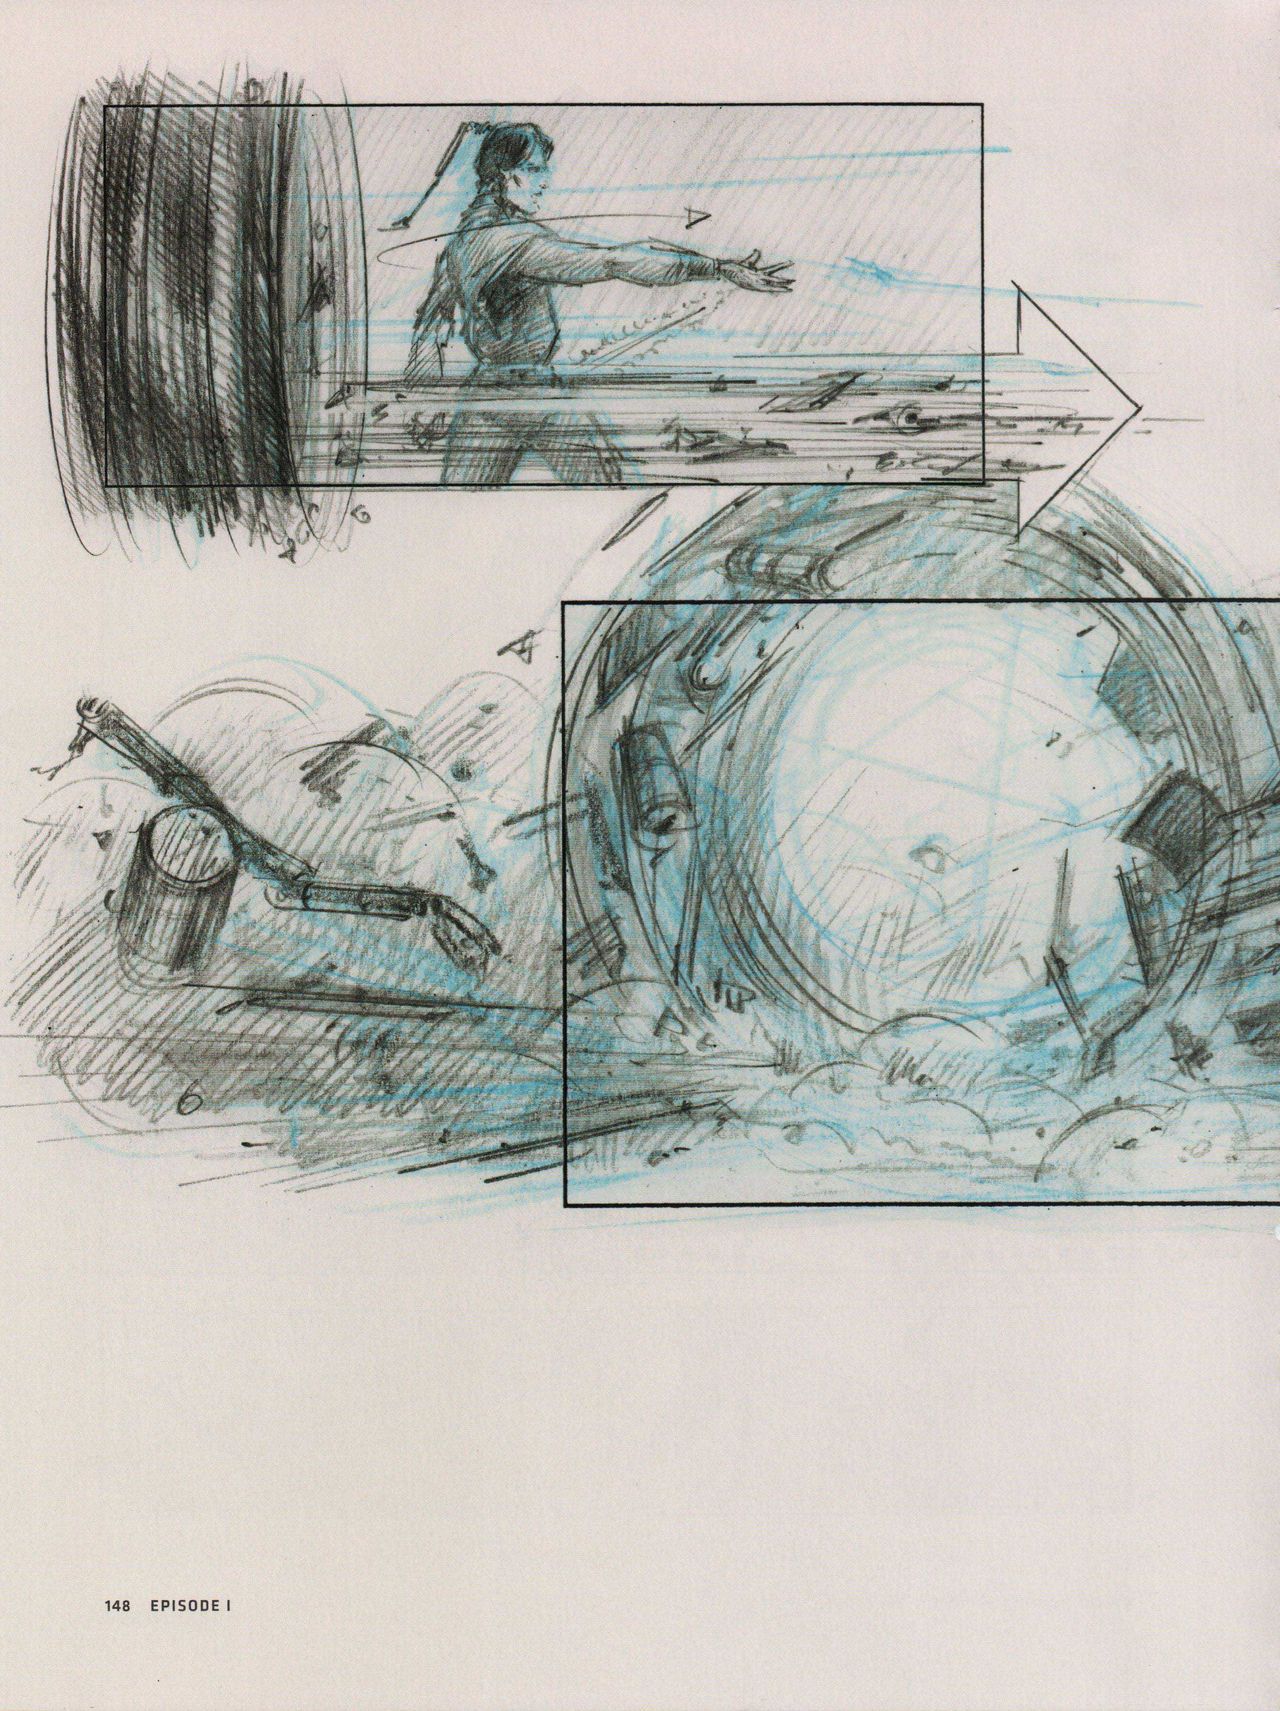 Star Wars Storyboards - The Prequel Trilogy 152